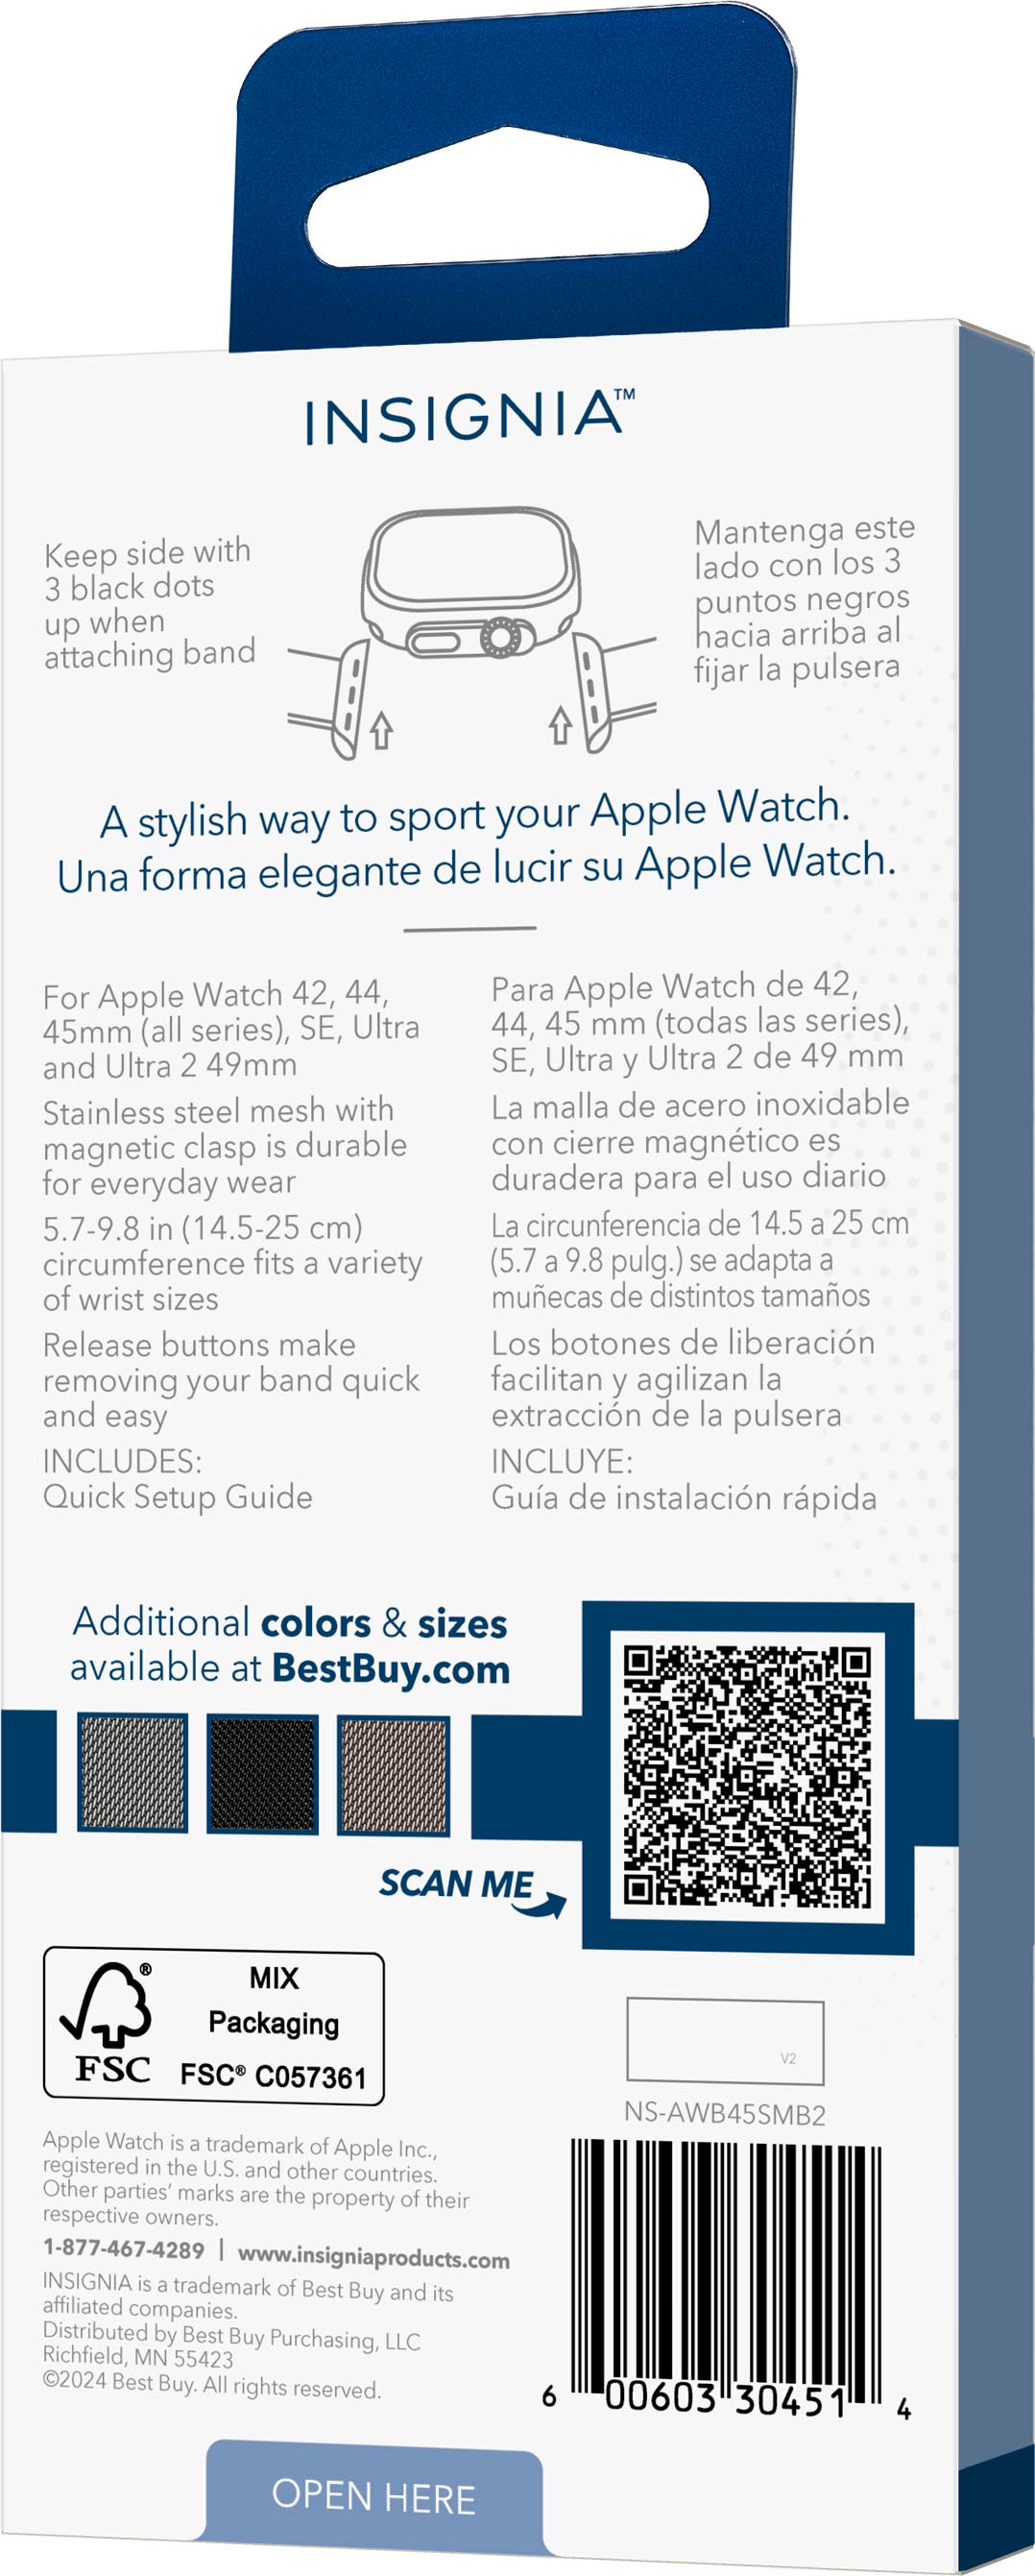 Insignia™ - Stainless Steel Mesh Band for Apple Watch 42mm, 44mm, 45mm, 49mm, SE, Ultra 49mm, and Ultra 2 49mm - Silver_8